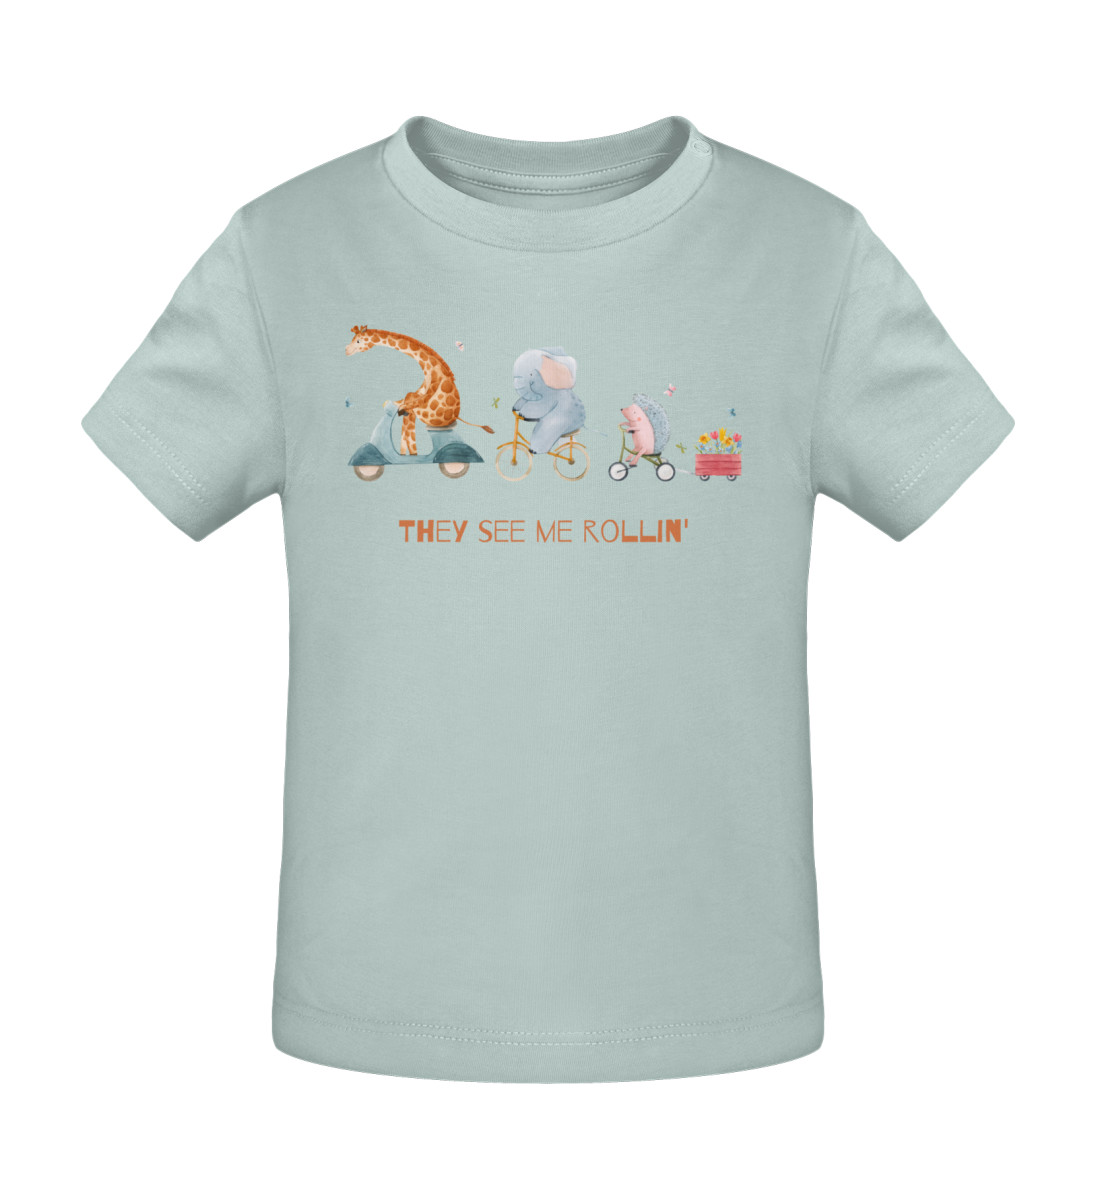 They see me rollin- - Baby Creator T-Shirt ST/ST-7033